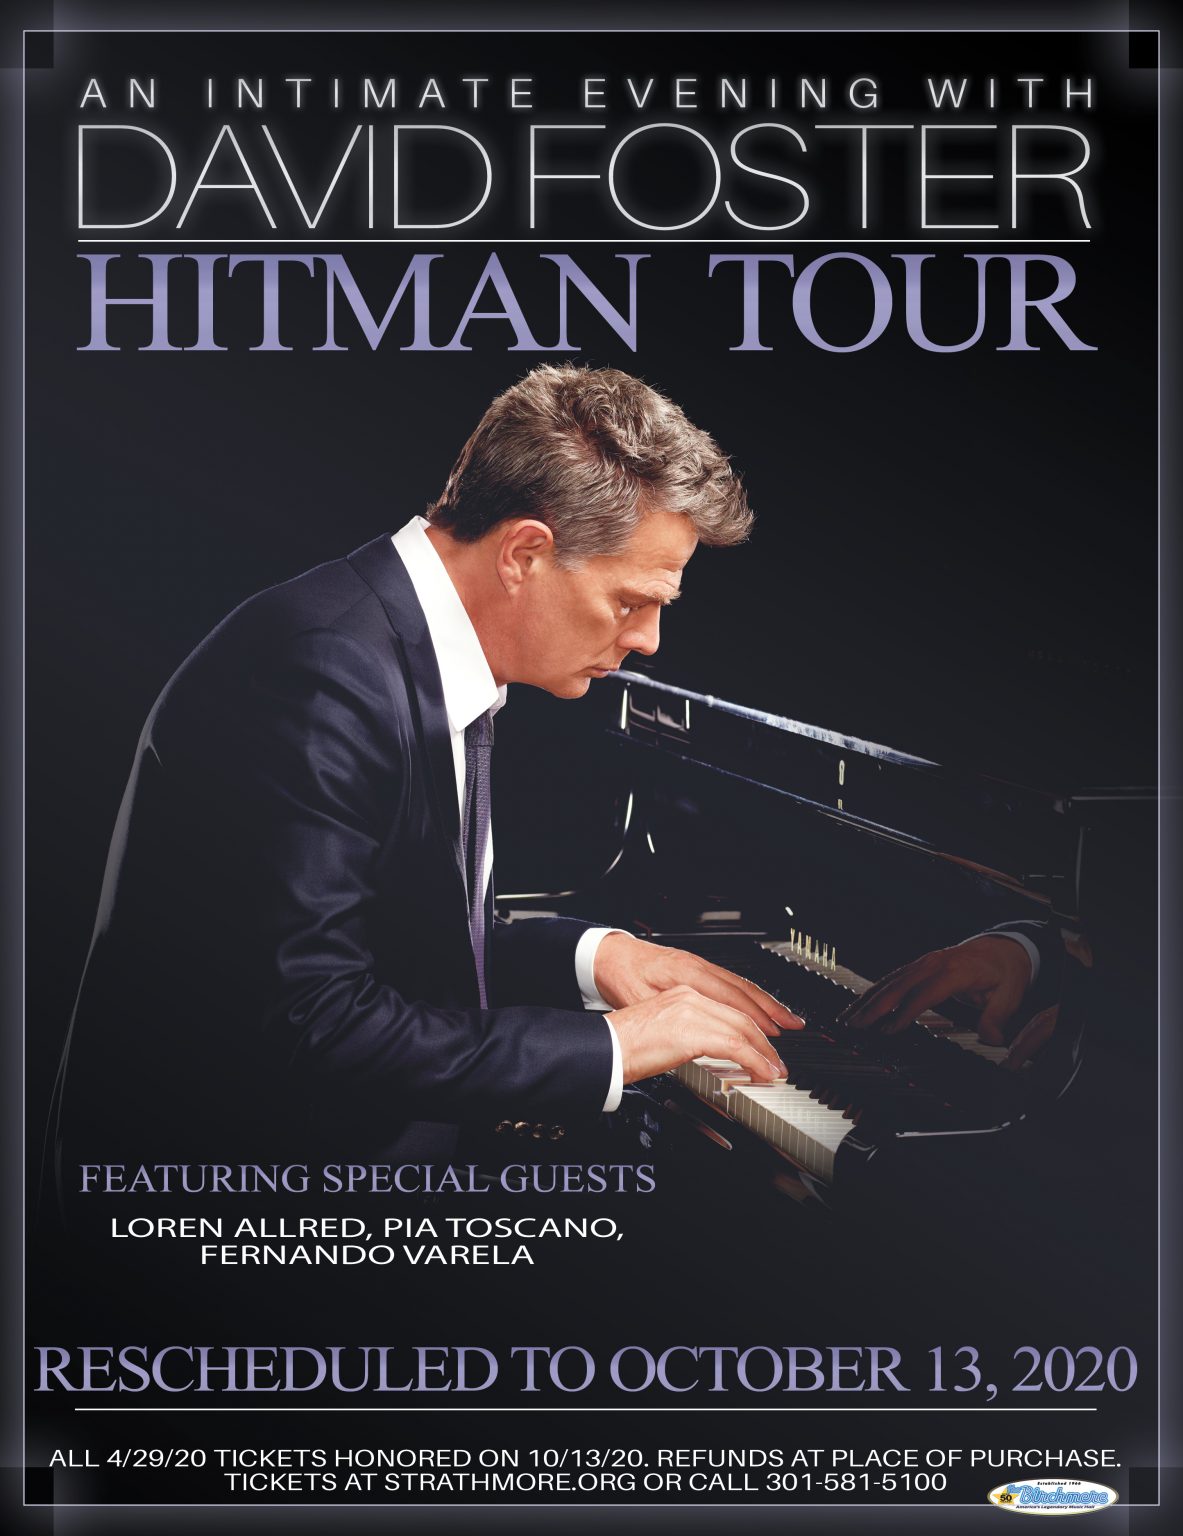 DAVID FOSTER “Hitman Tour” at Strathmore! RESCHEDULED for Tue. Oct